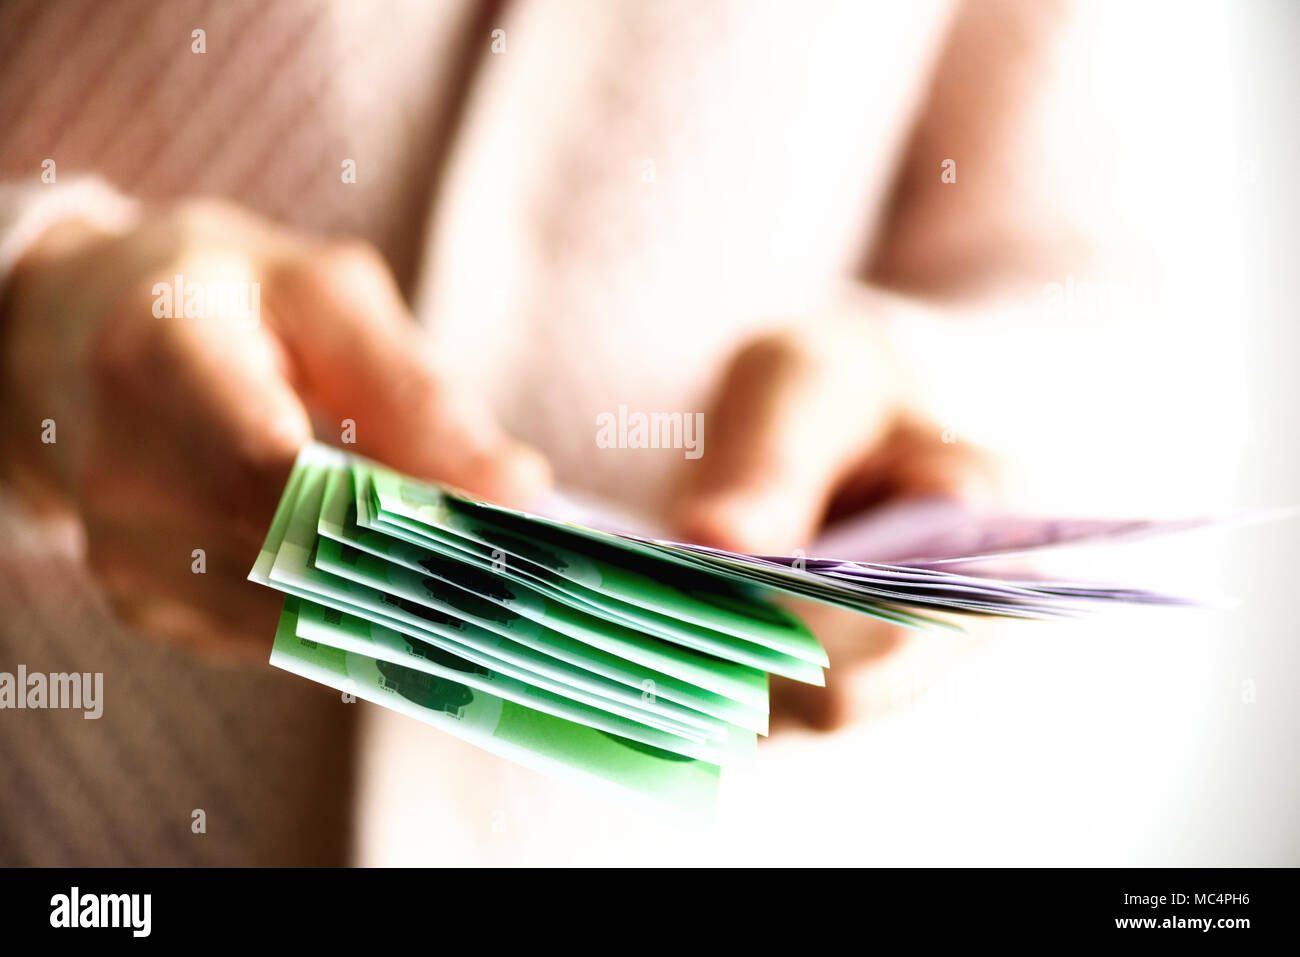 Woman hands holding euro currency money banknotes. Payment and cash concept. Copy space Stock Photo